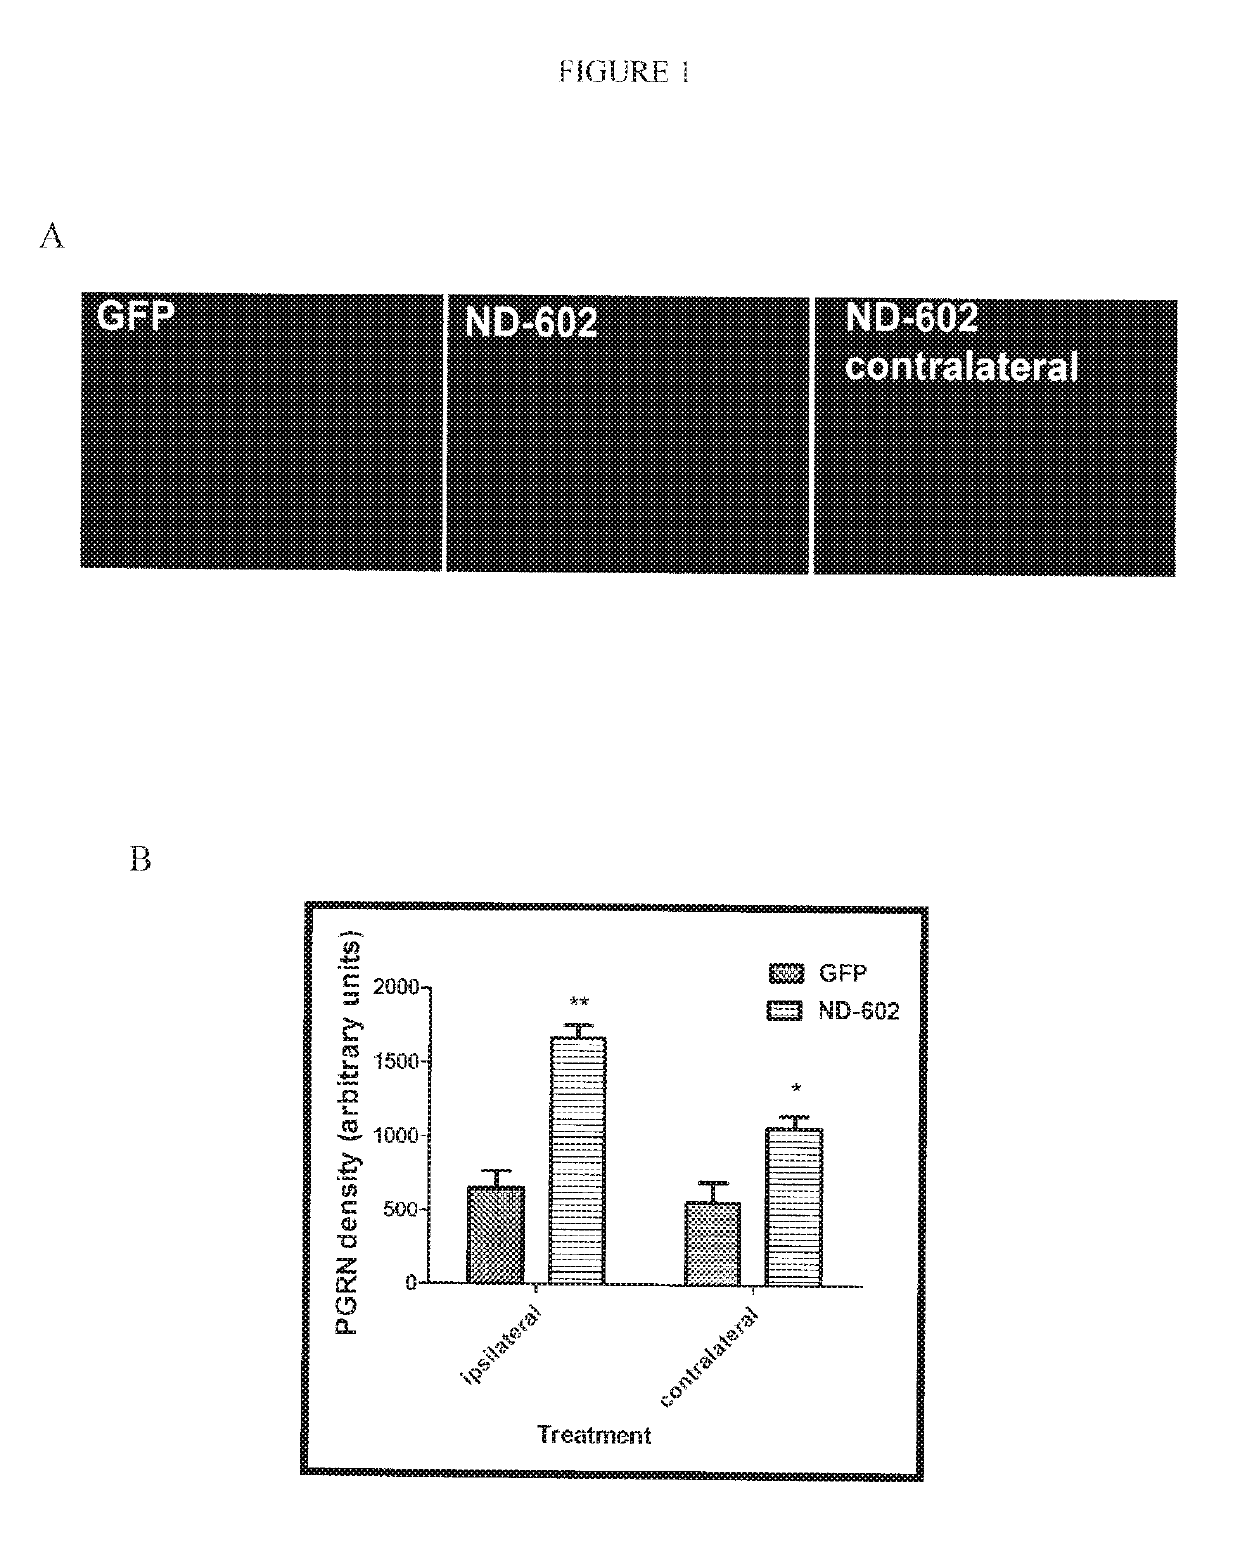 Method for increasing neprilysin expression and activity